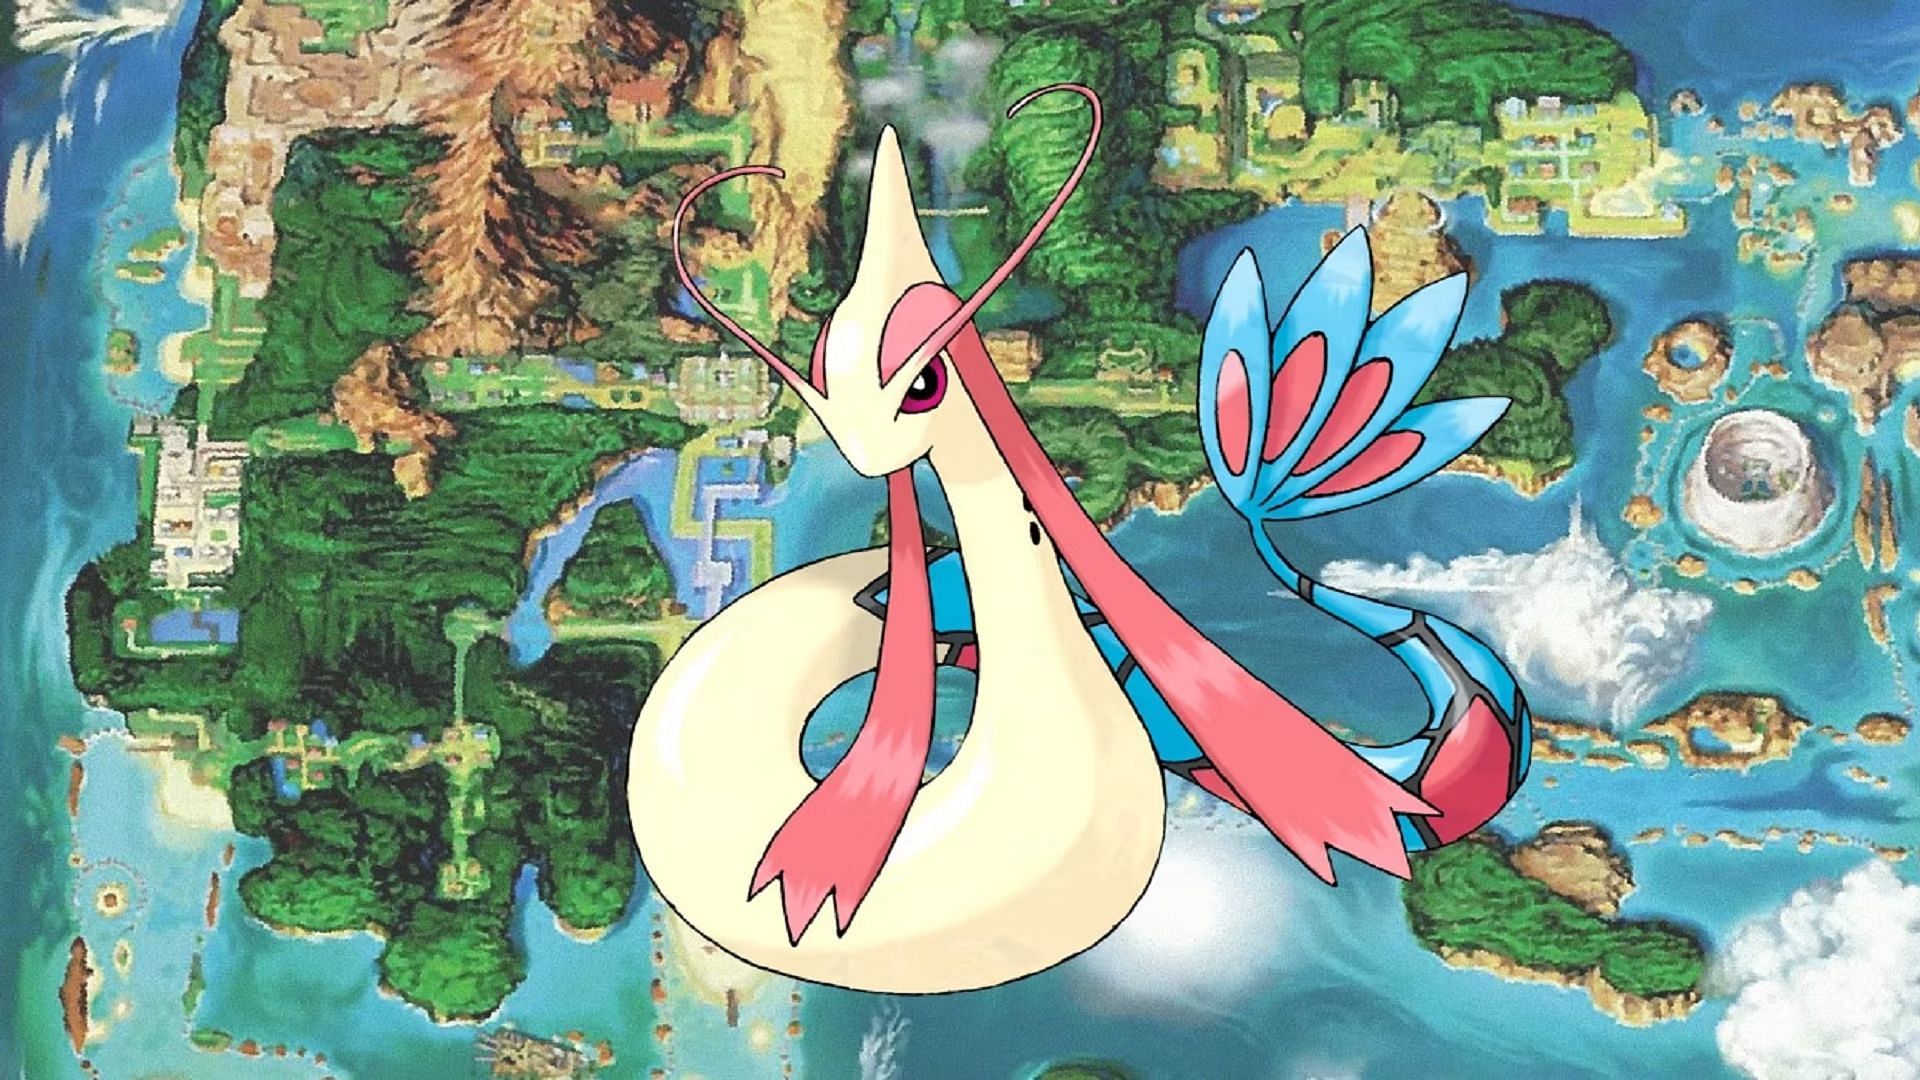 Milotic is a much more formidable Pokemon compared to Feebas (Image via The Pokemon Company)